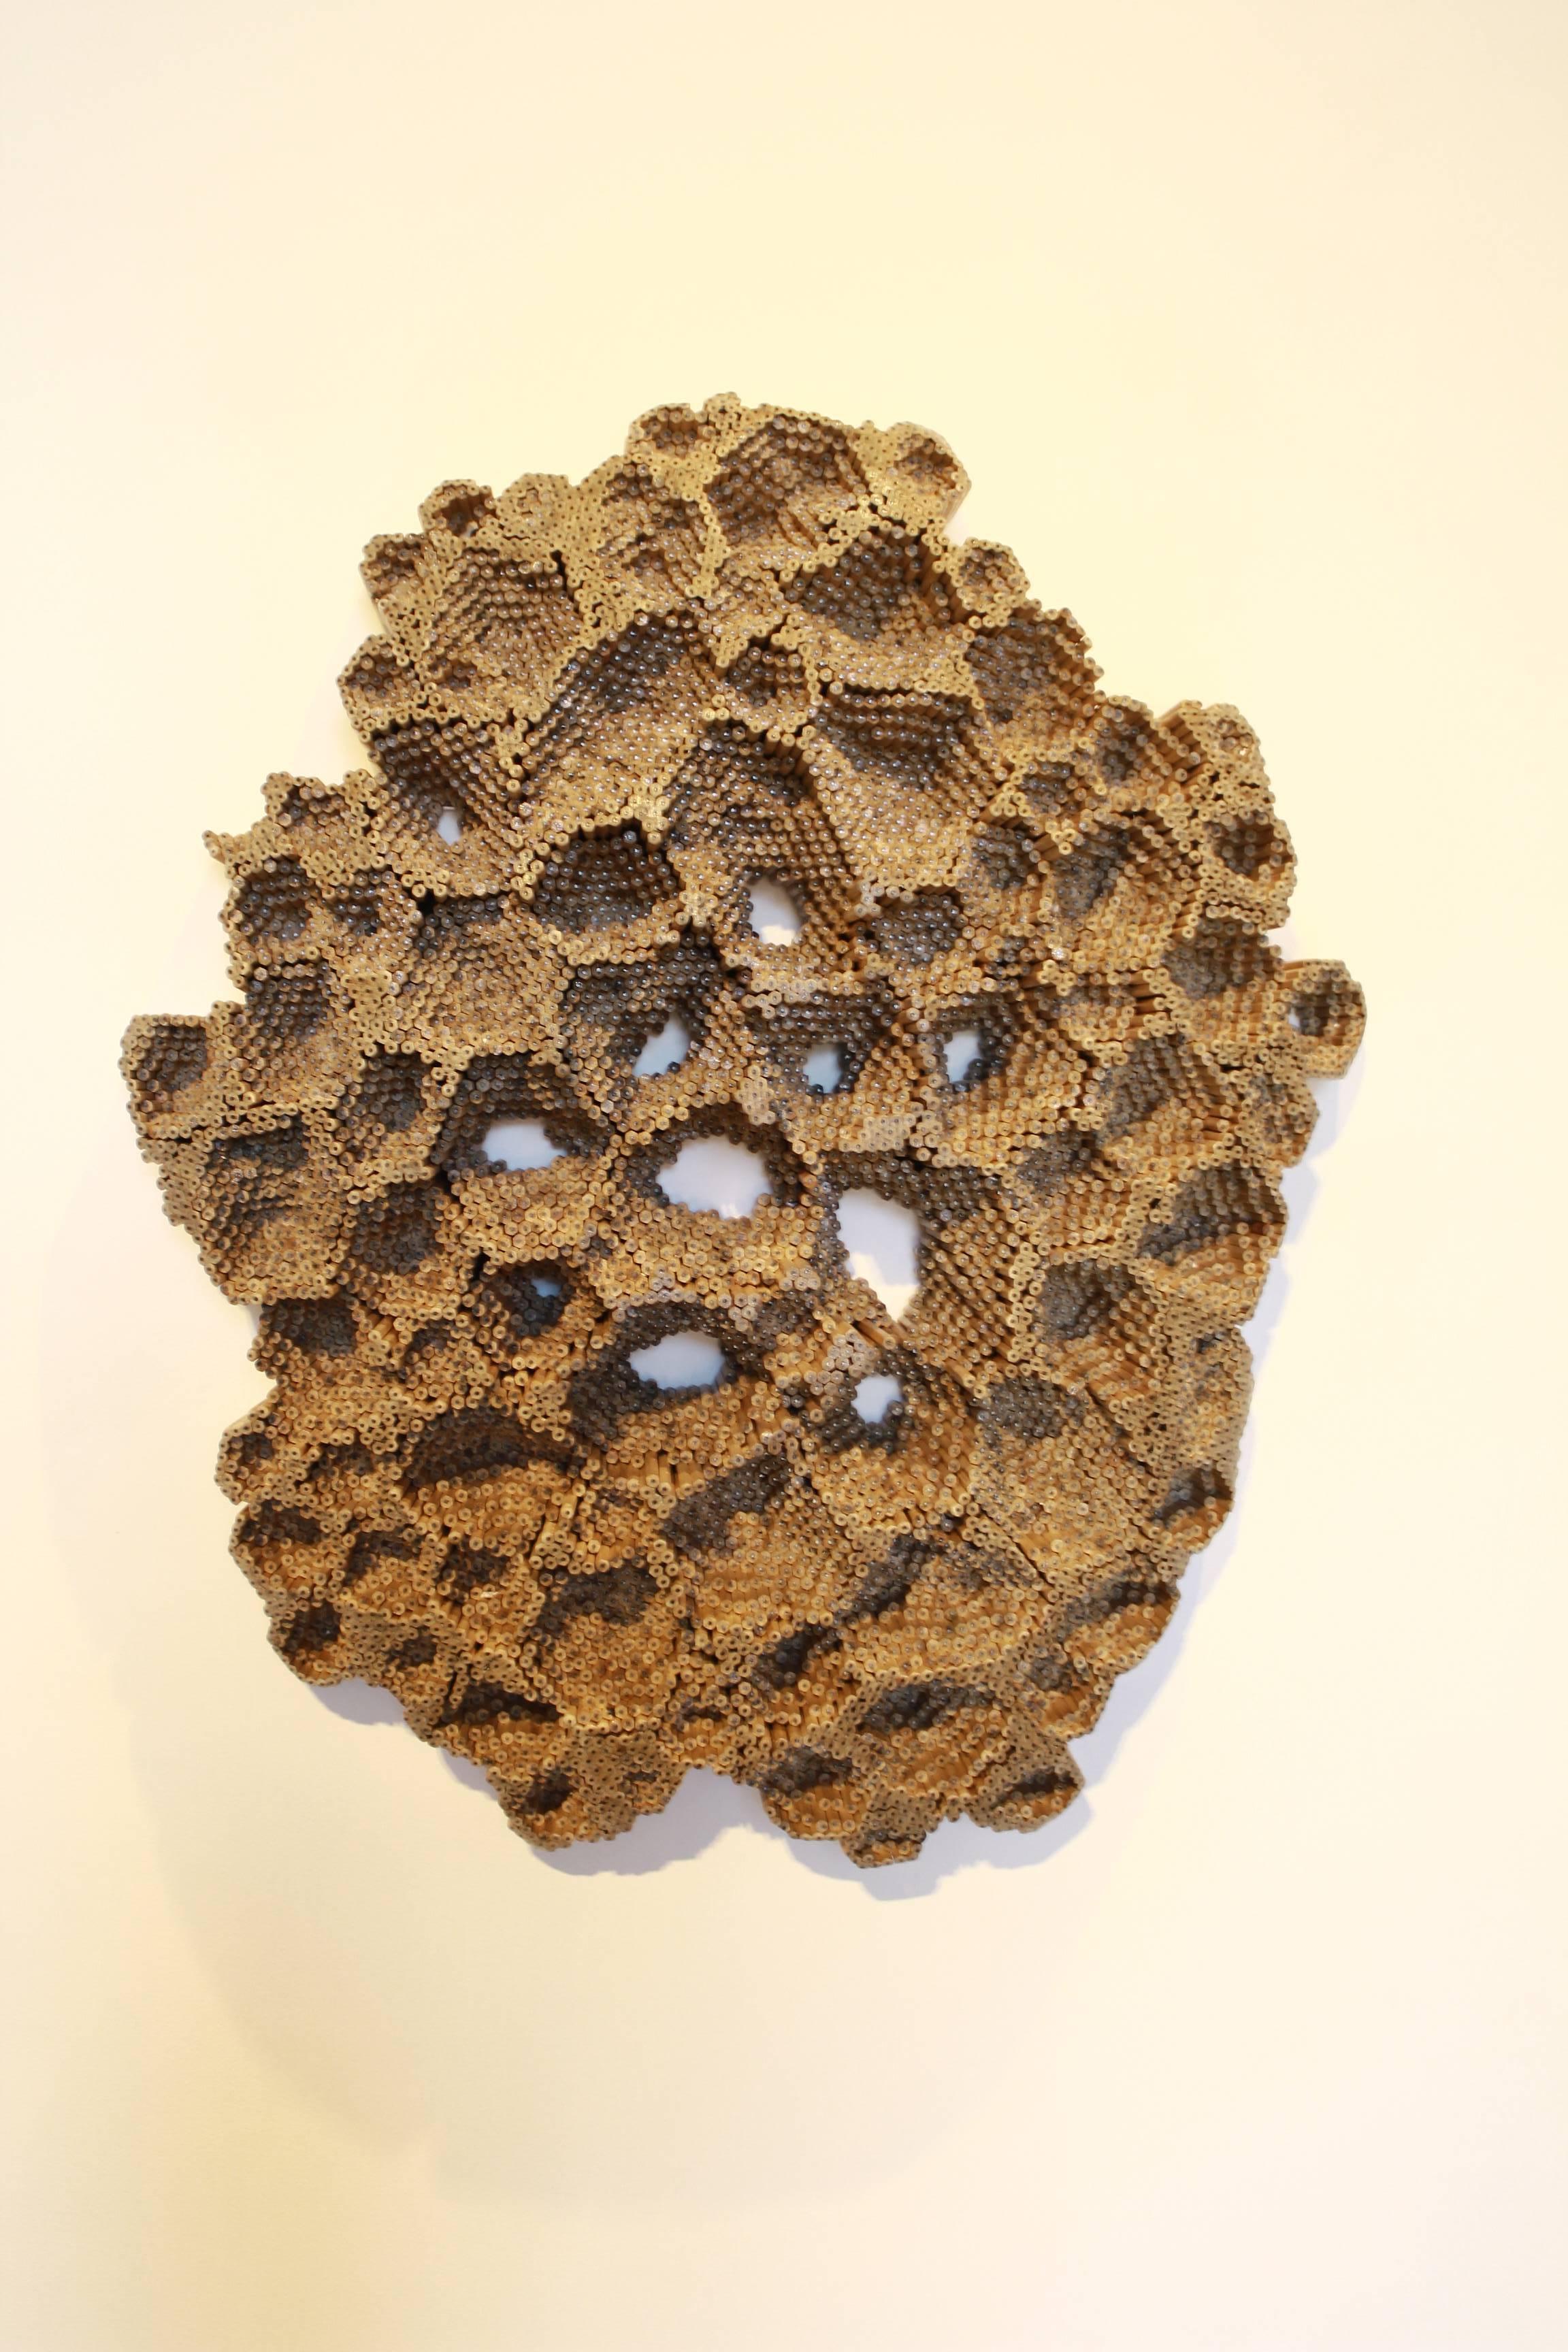 Colony
Pencils
35” H x 30” W
$10,000
Jessica Drenk is an American artist raised in Montana, where she developed an appreciation for the natural world that remains an important inspiration to her artwork today.  Tactile and textural, her sculptures